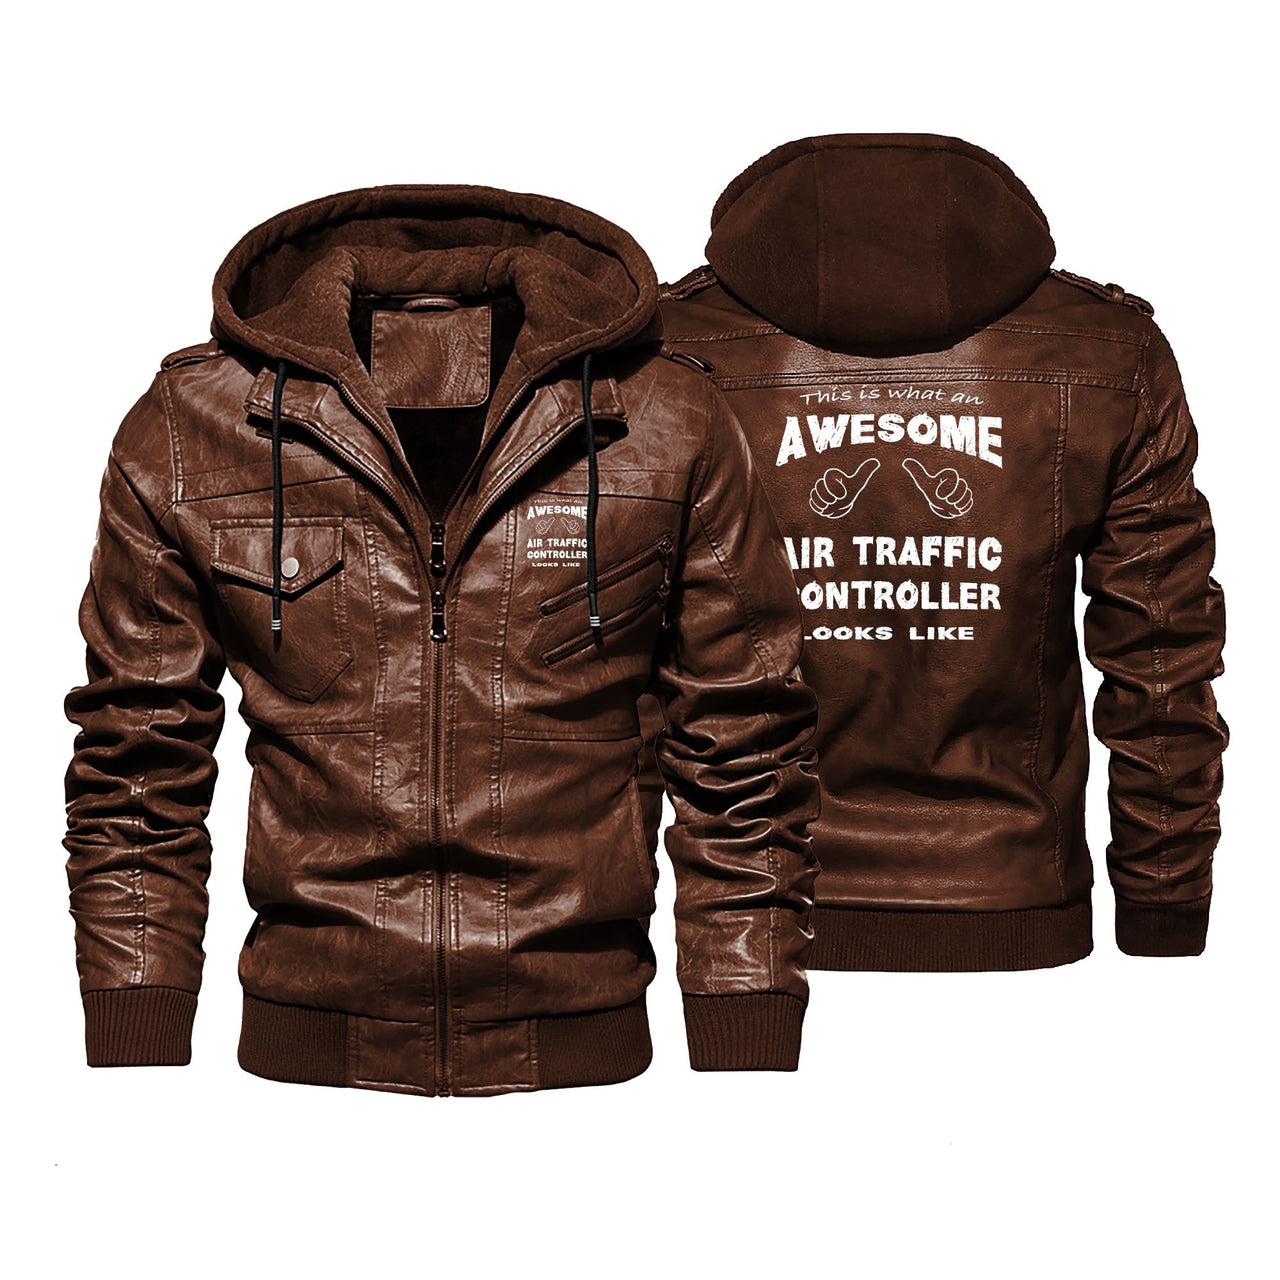 Air Traffic Controller Designed Hooded Leather Jackets